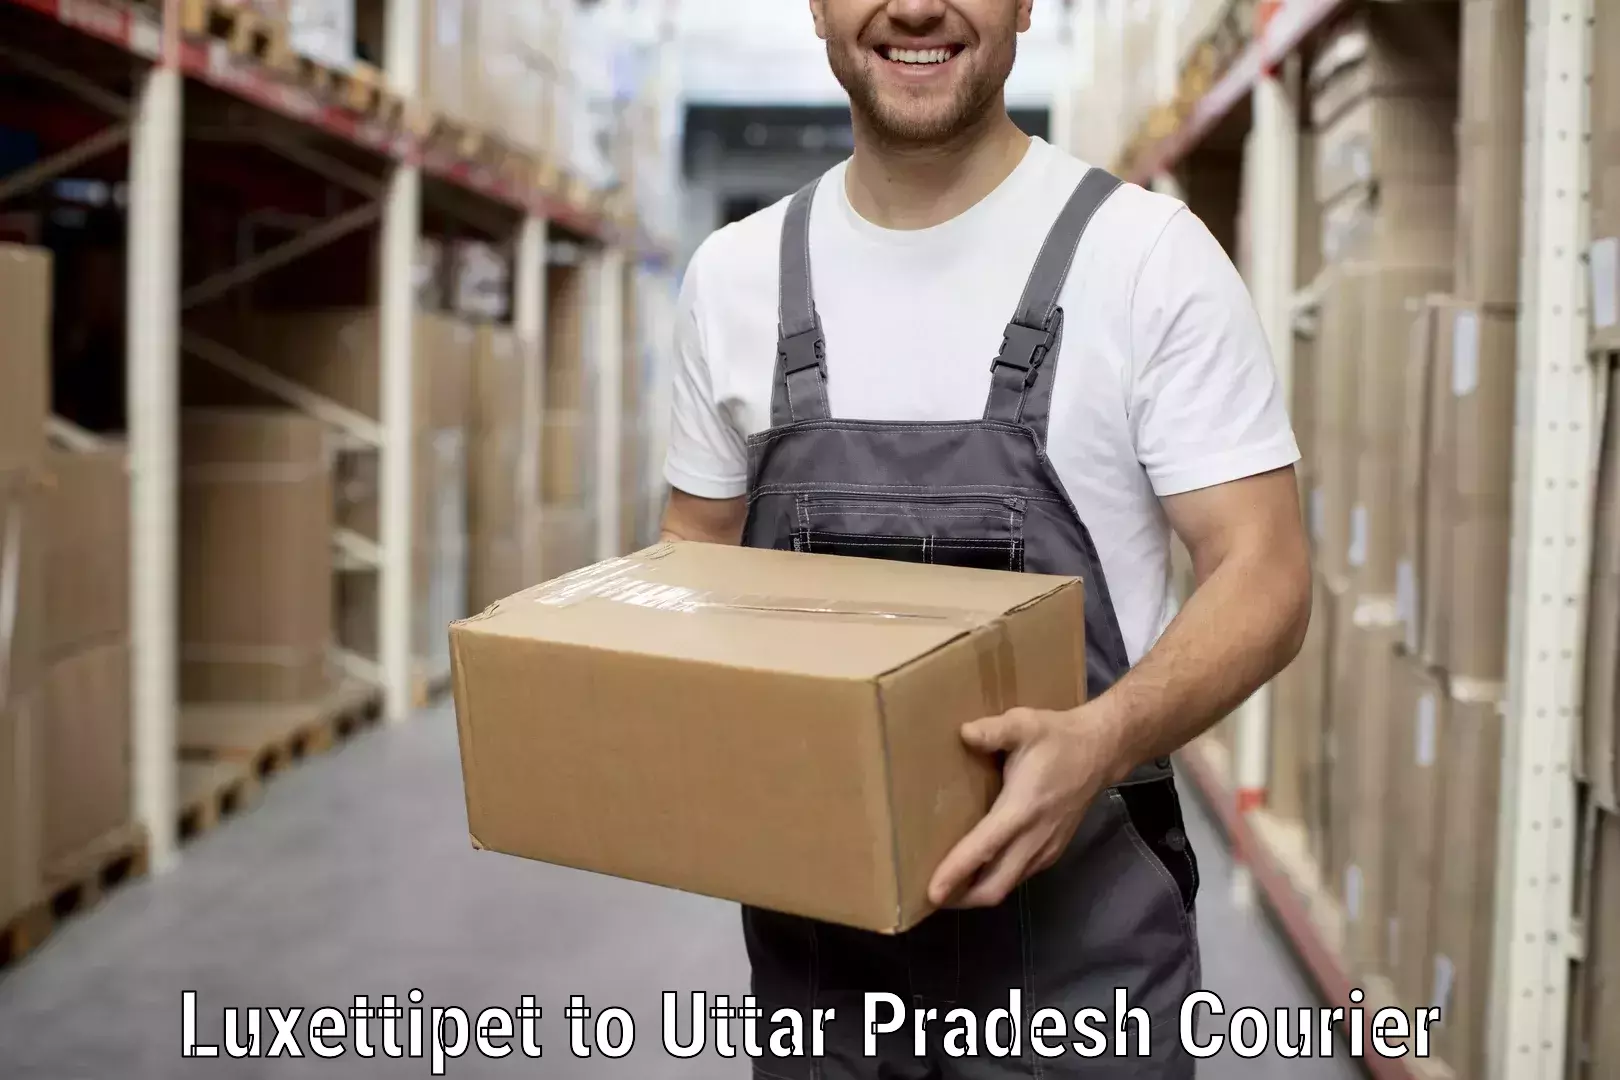 Reliable moving assistance in Luxettipet to Amroha